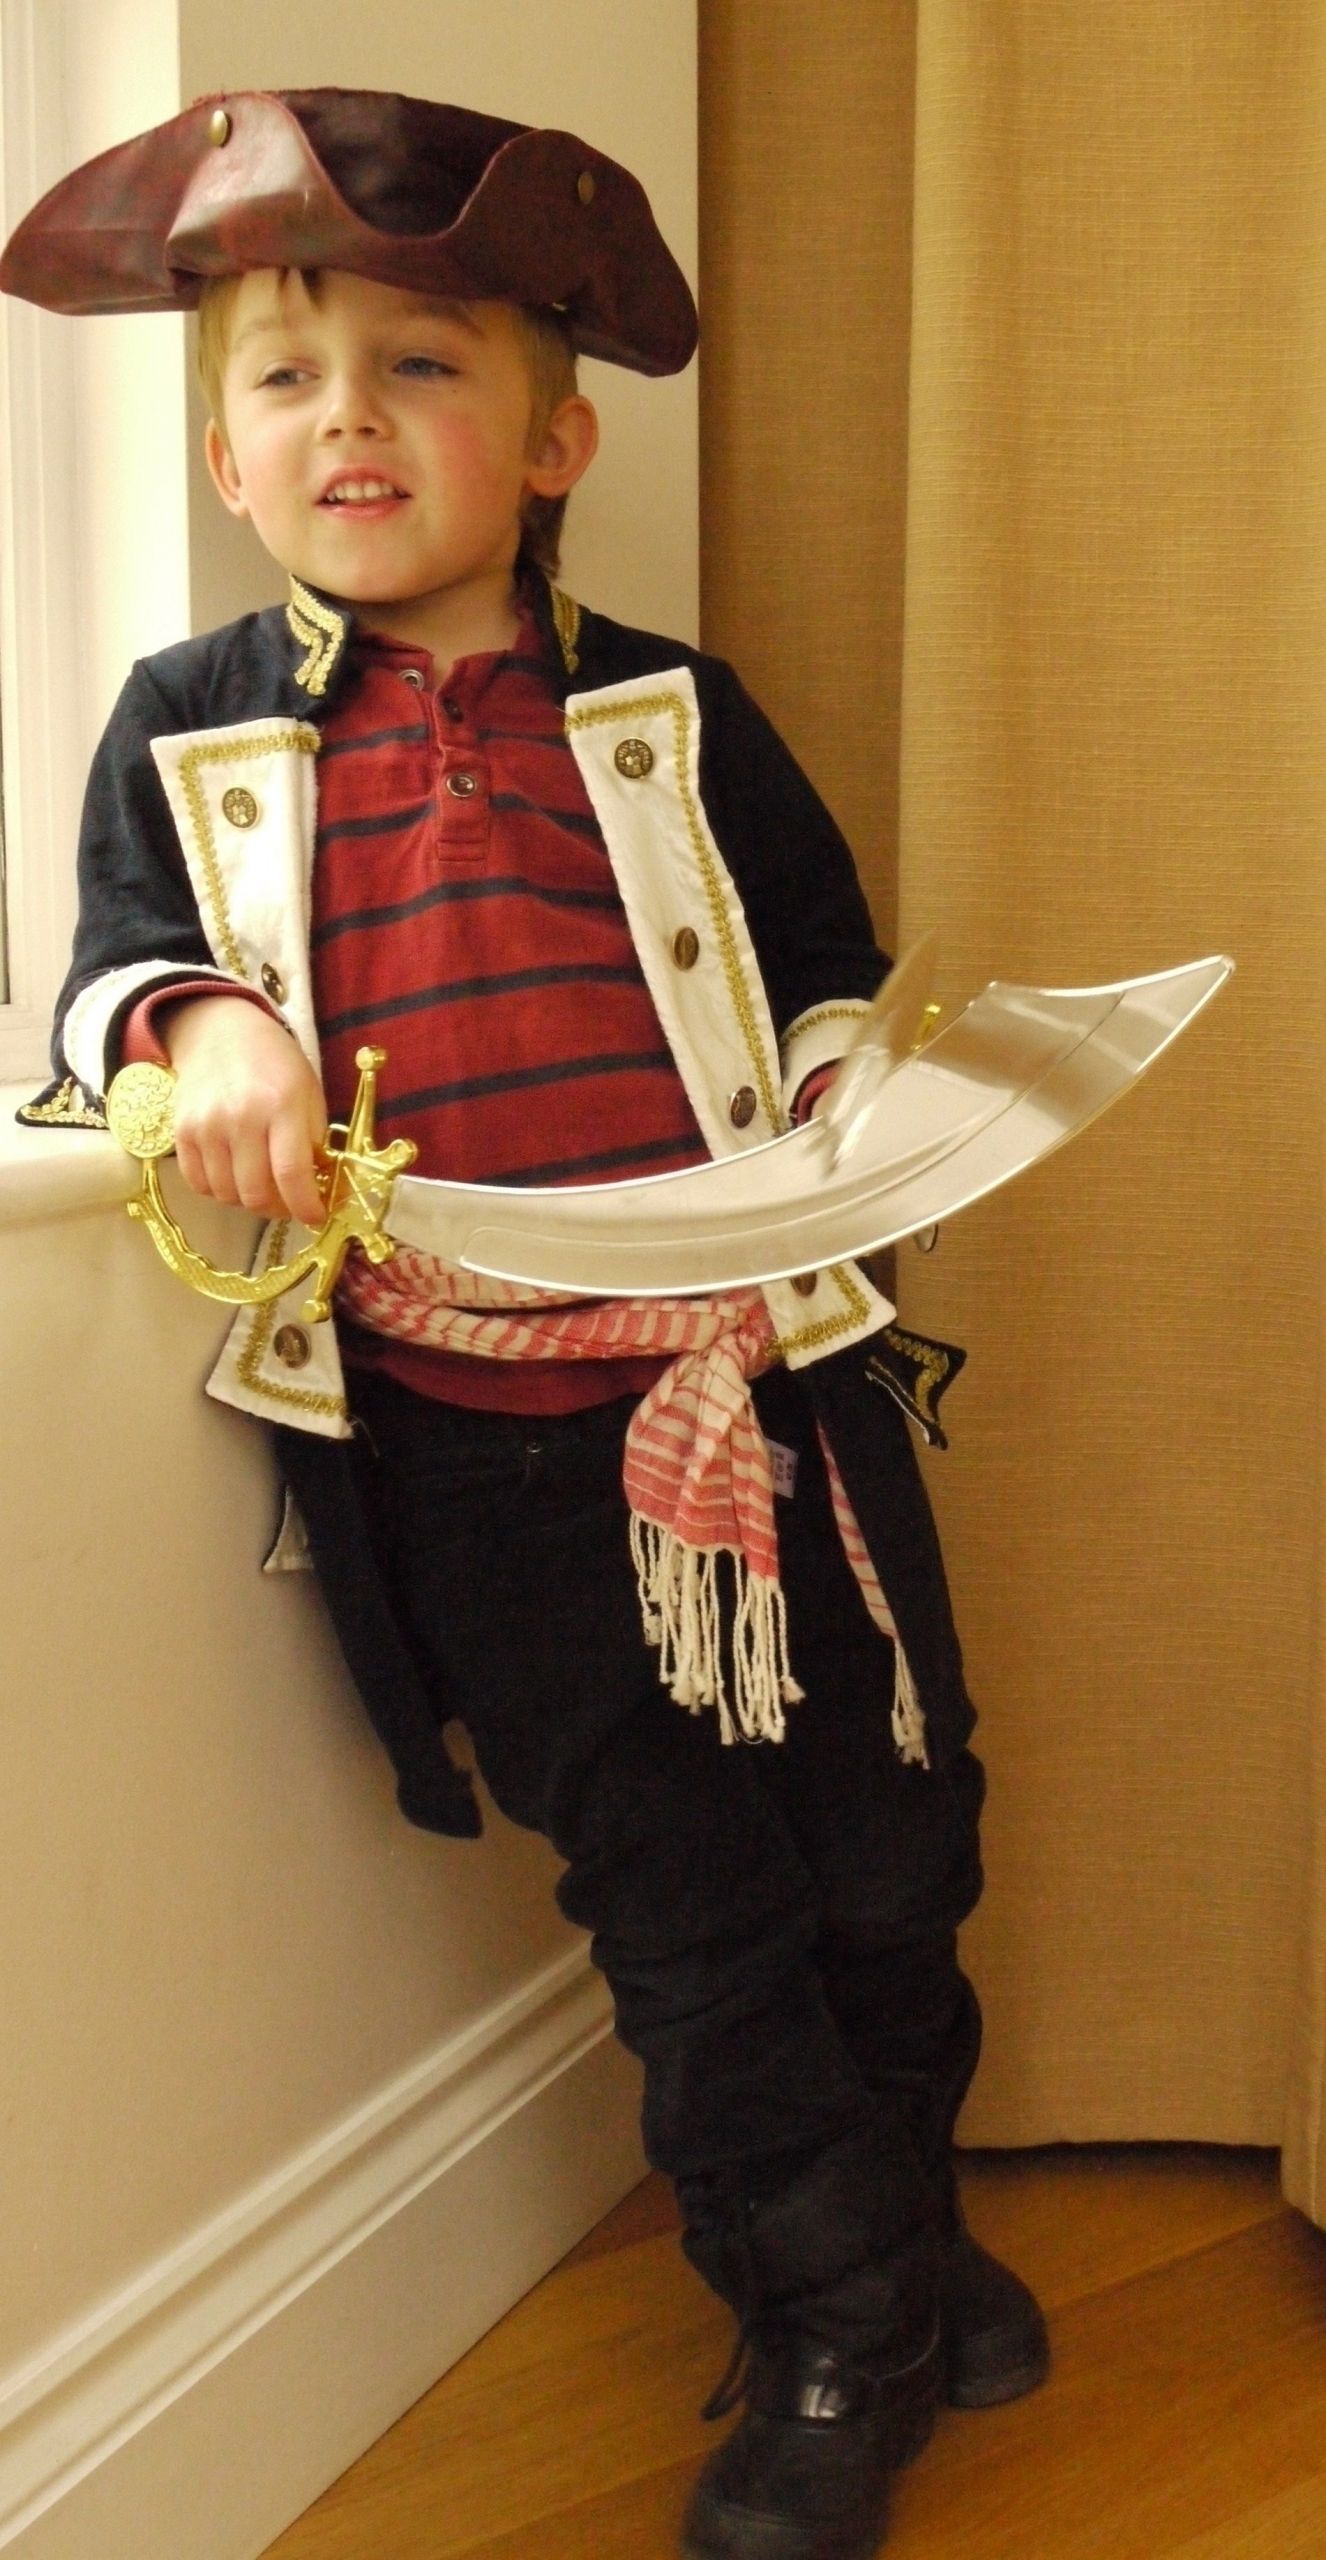 DIY Toddler Pirate Costume
 10 Attractive Homemade Pirate Costume Ideas For Kids 2019